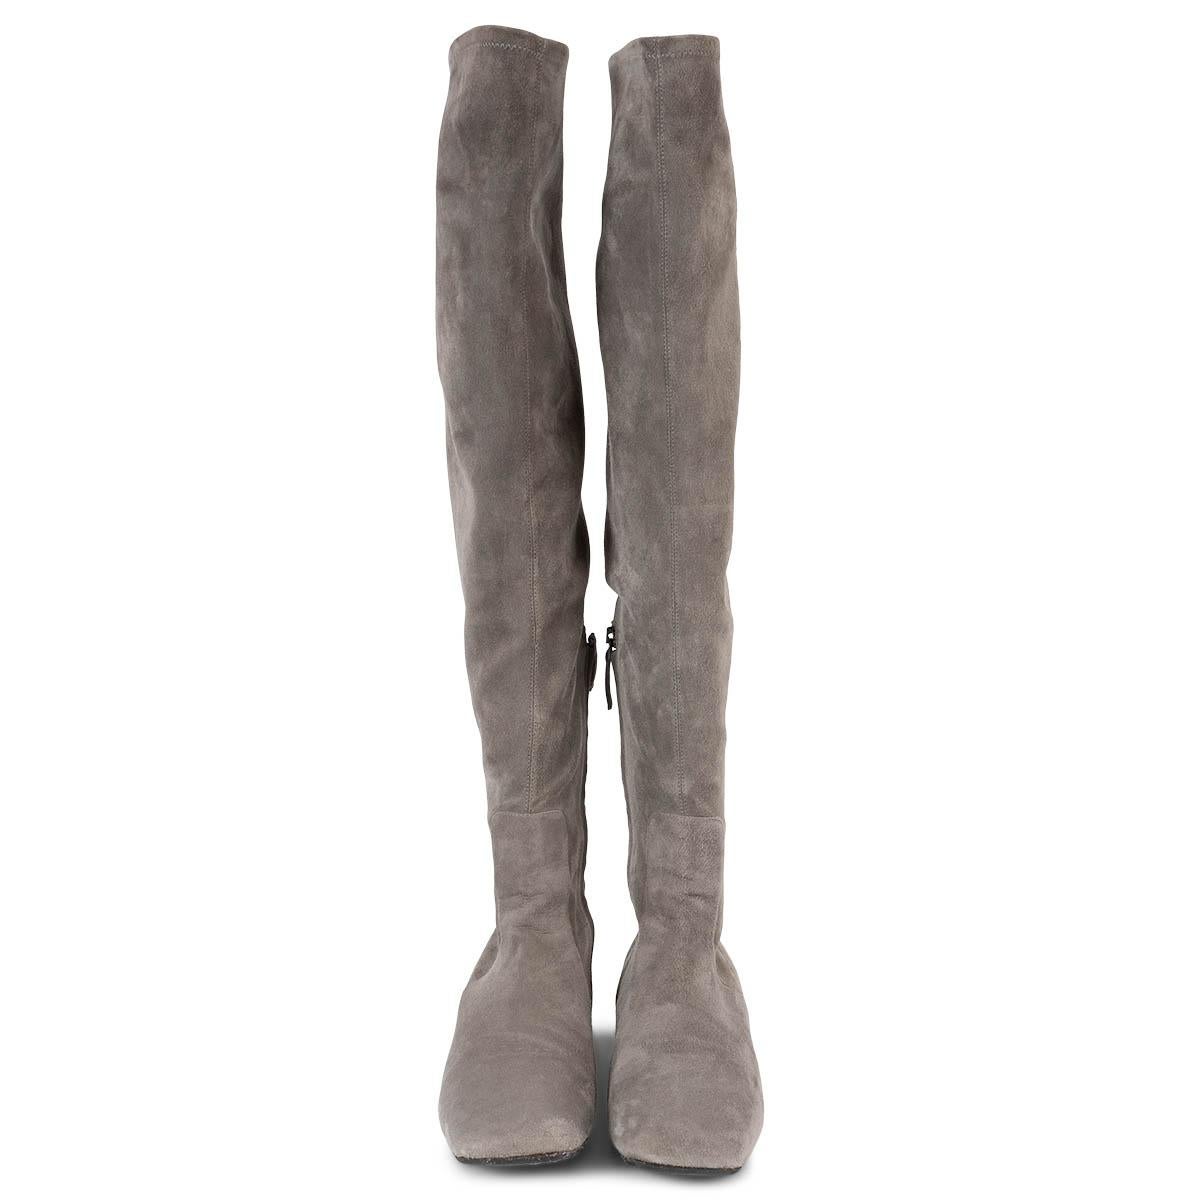 100% authentic Brunello Cucinelli Monili embellished block heel over-knee boots in grey stretchy suede. Open with an inner mid-calf zipper. Have been worn and are in excellent condition. Come with dust bag. 

Measurements
Imprinted Size	39
Shoe